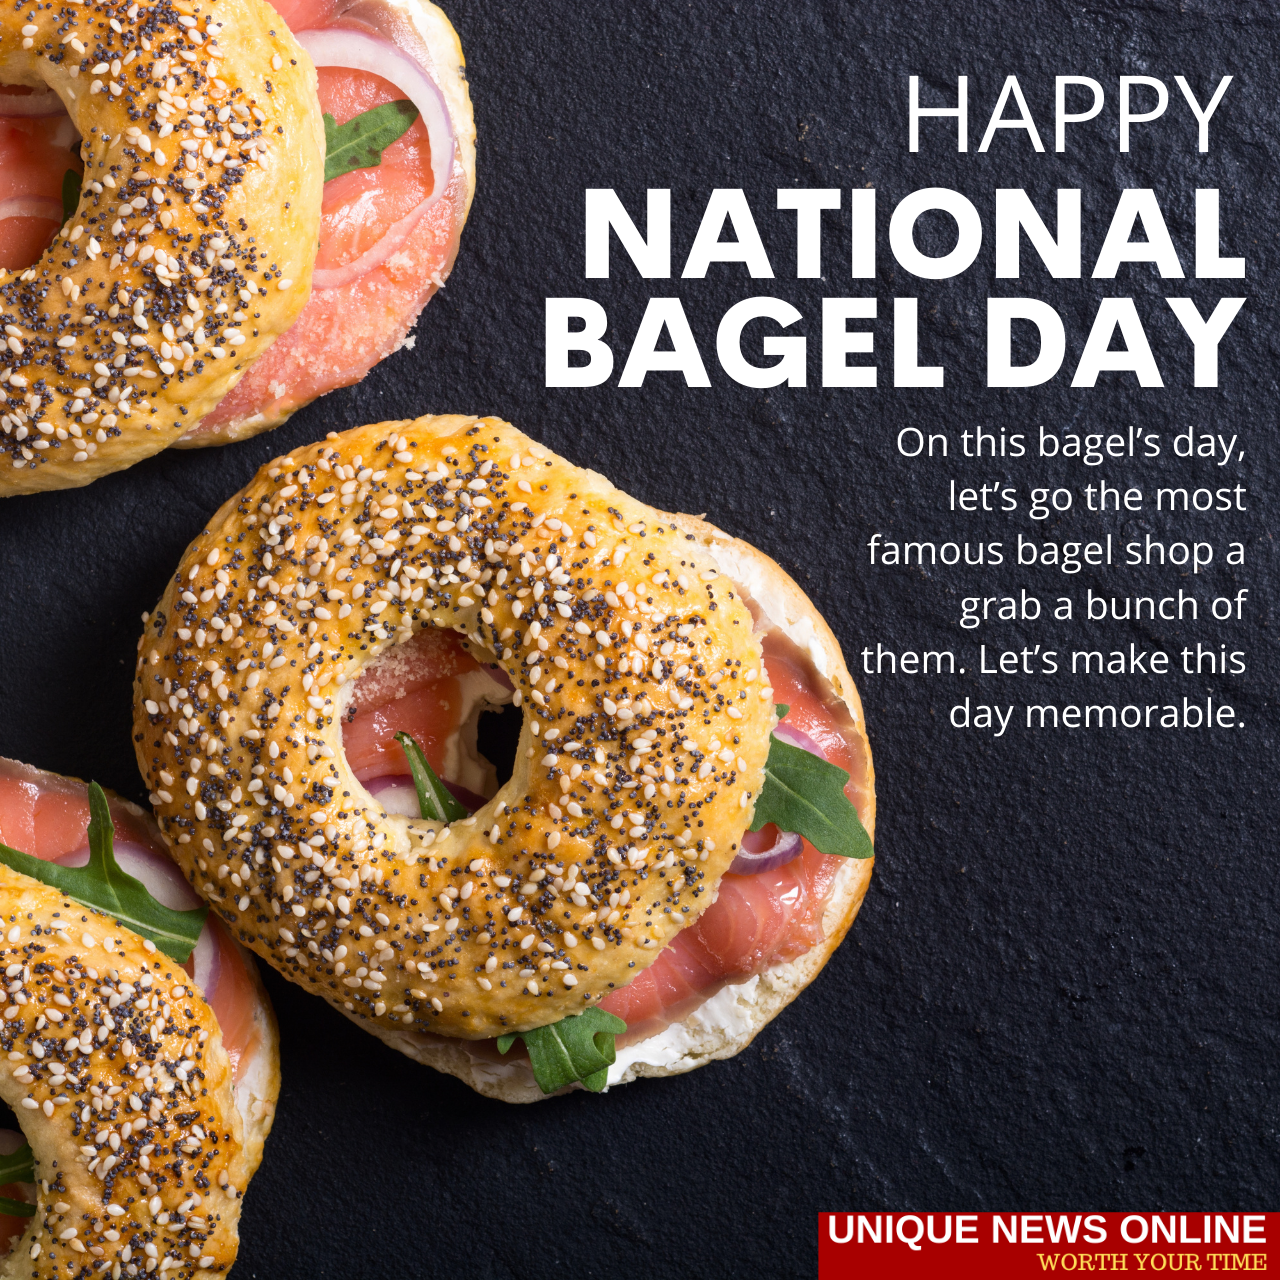 National Bagel Day 2022: Quotes, HD Images, Quotes, Instagram Captions, Memes, Wishes to celebrate " slightly sweet, somewhat salty"